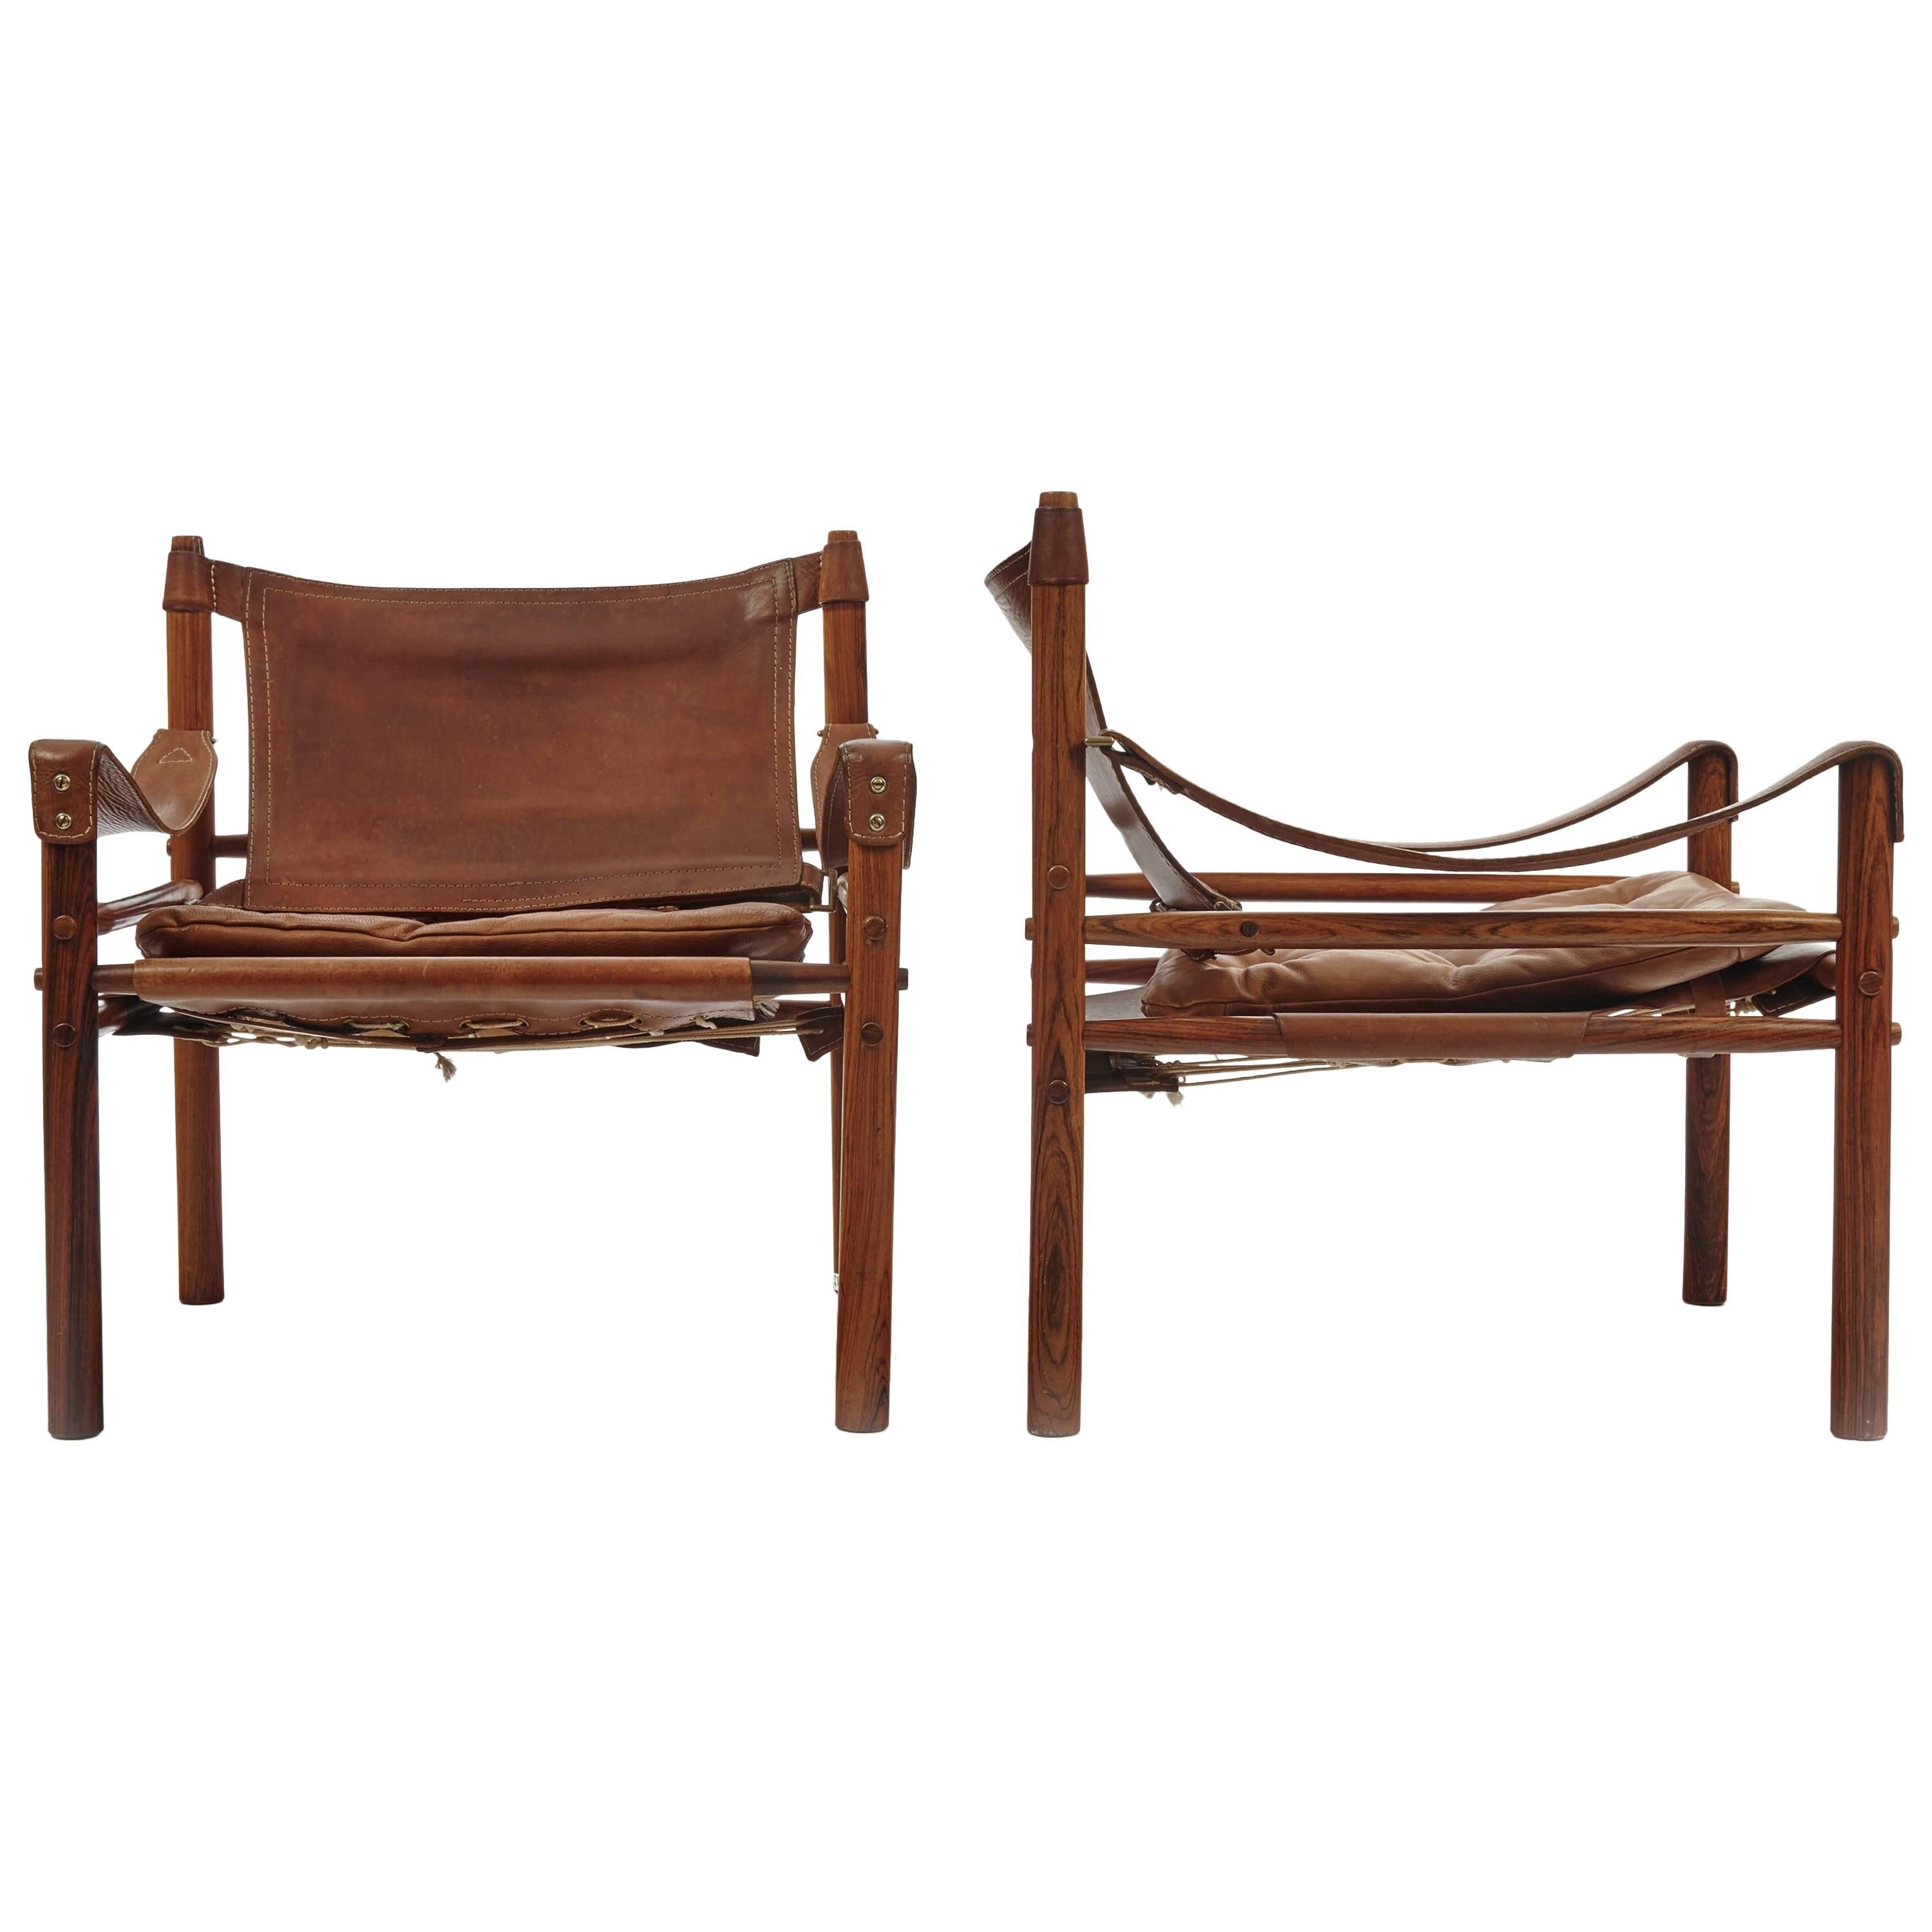 Pair of Rosewood Arne Norell Sirocco Safari Chairs, Aneby Mobler, Sweden, 1960s